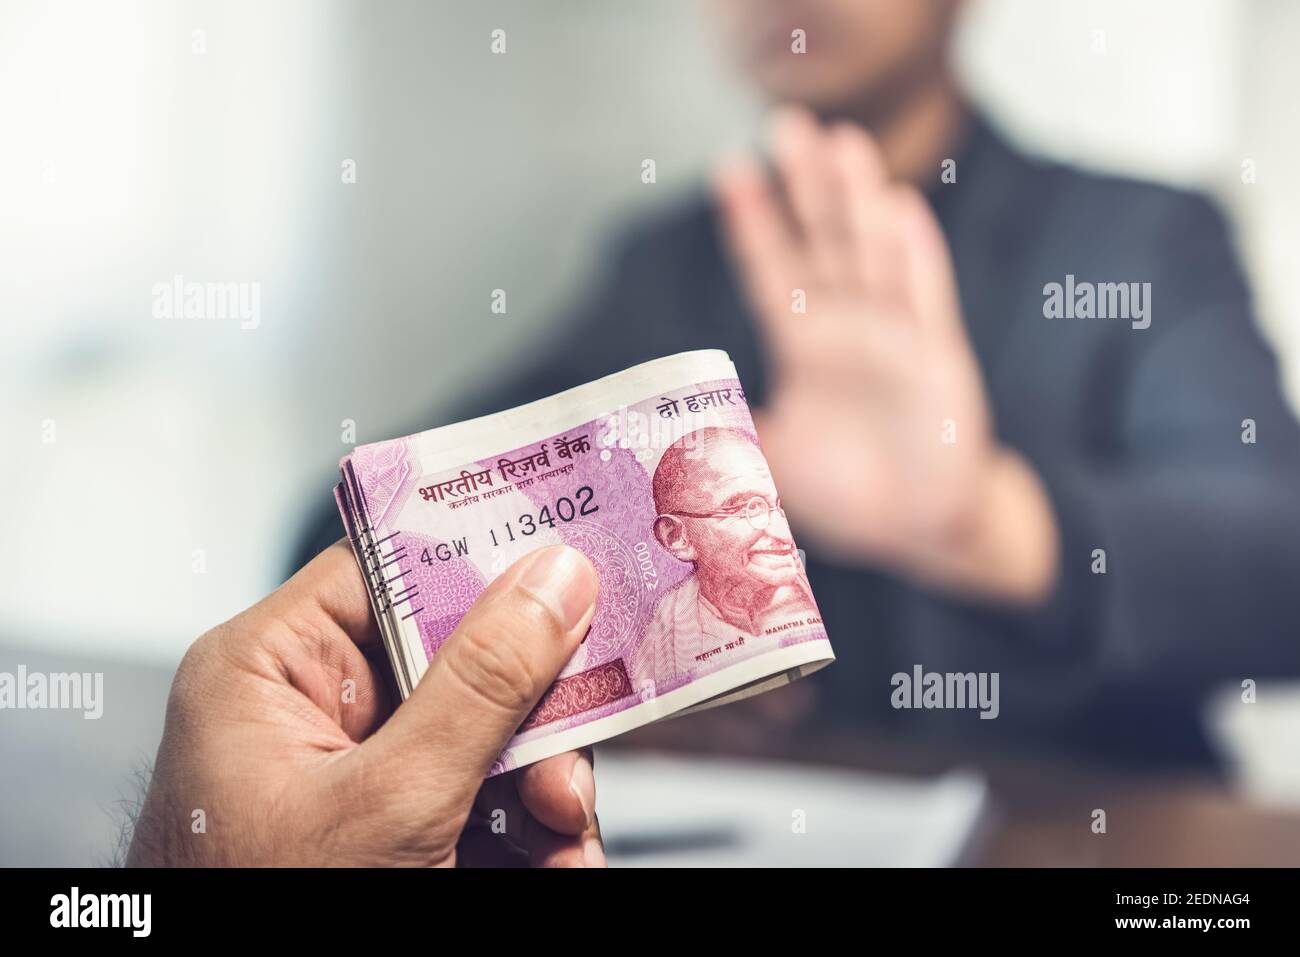 Businessman offering money in the form of Indian Rupee currency as a bribe Stock Photo